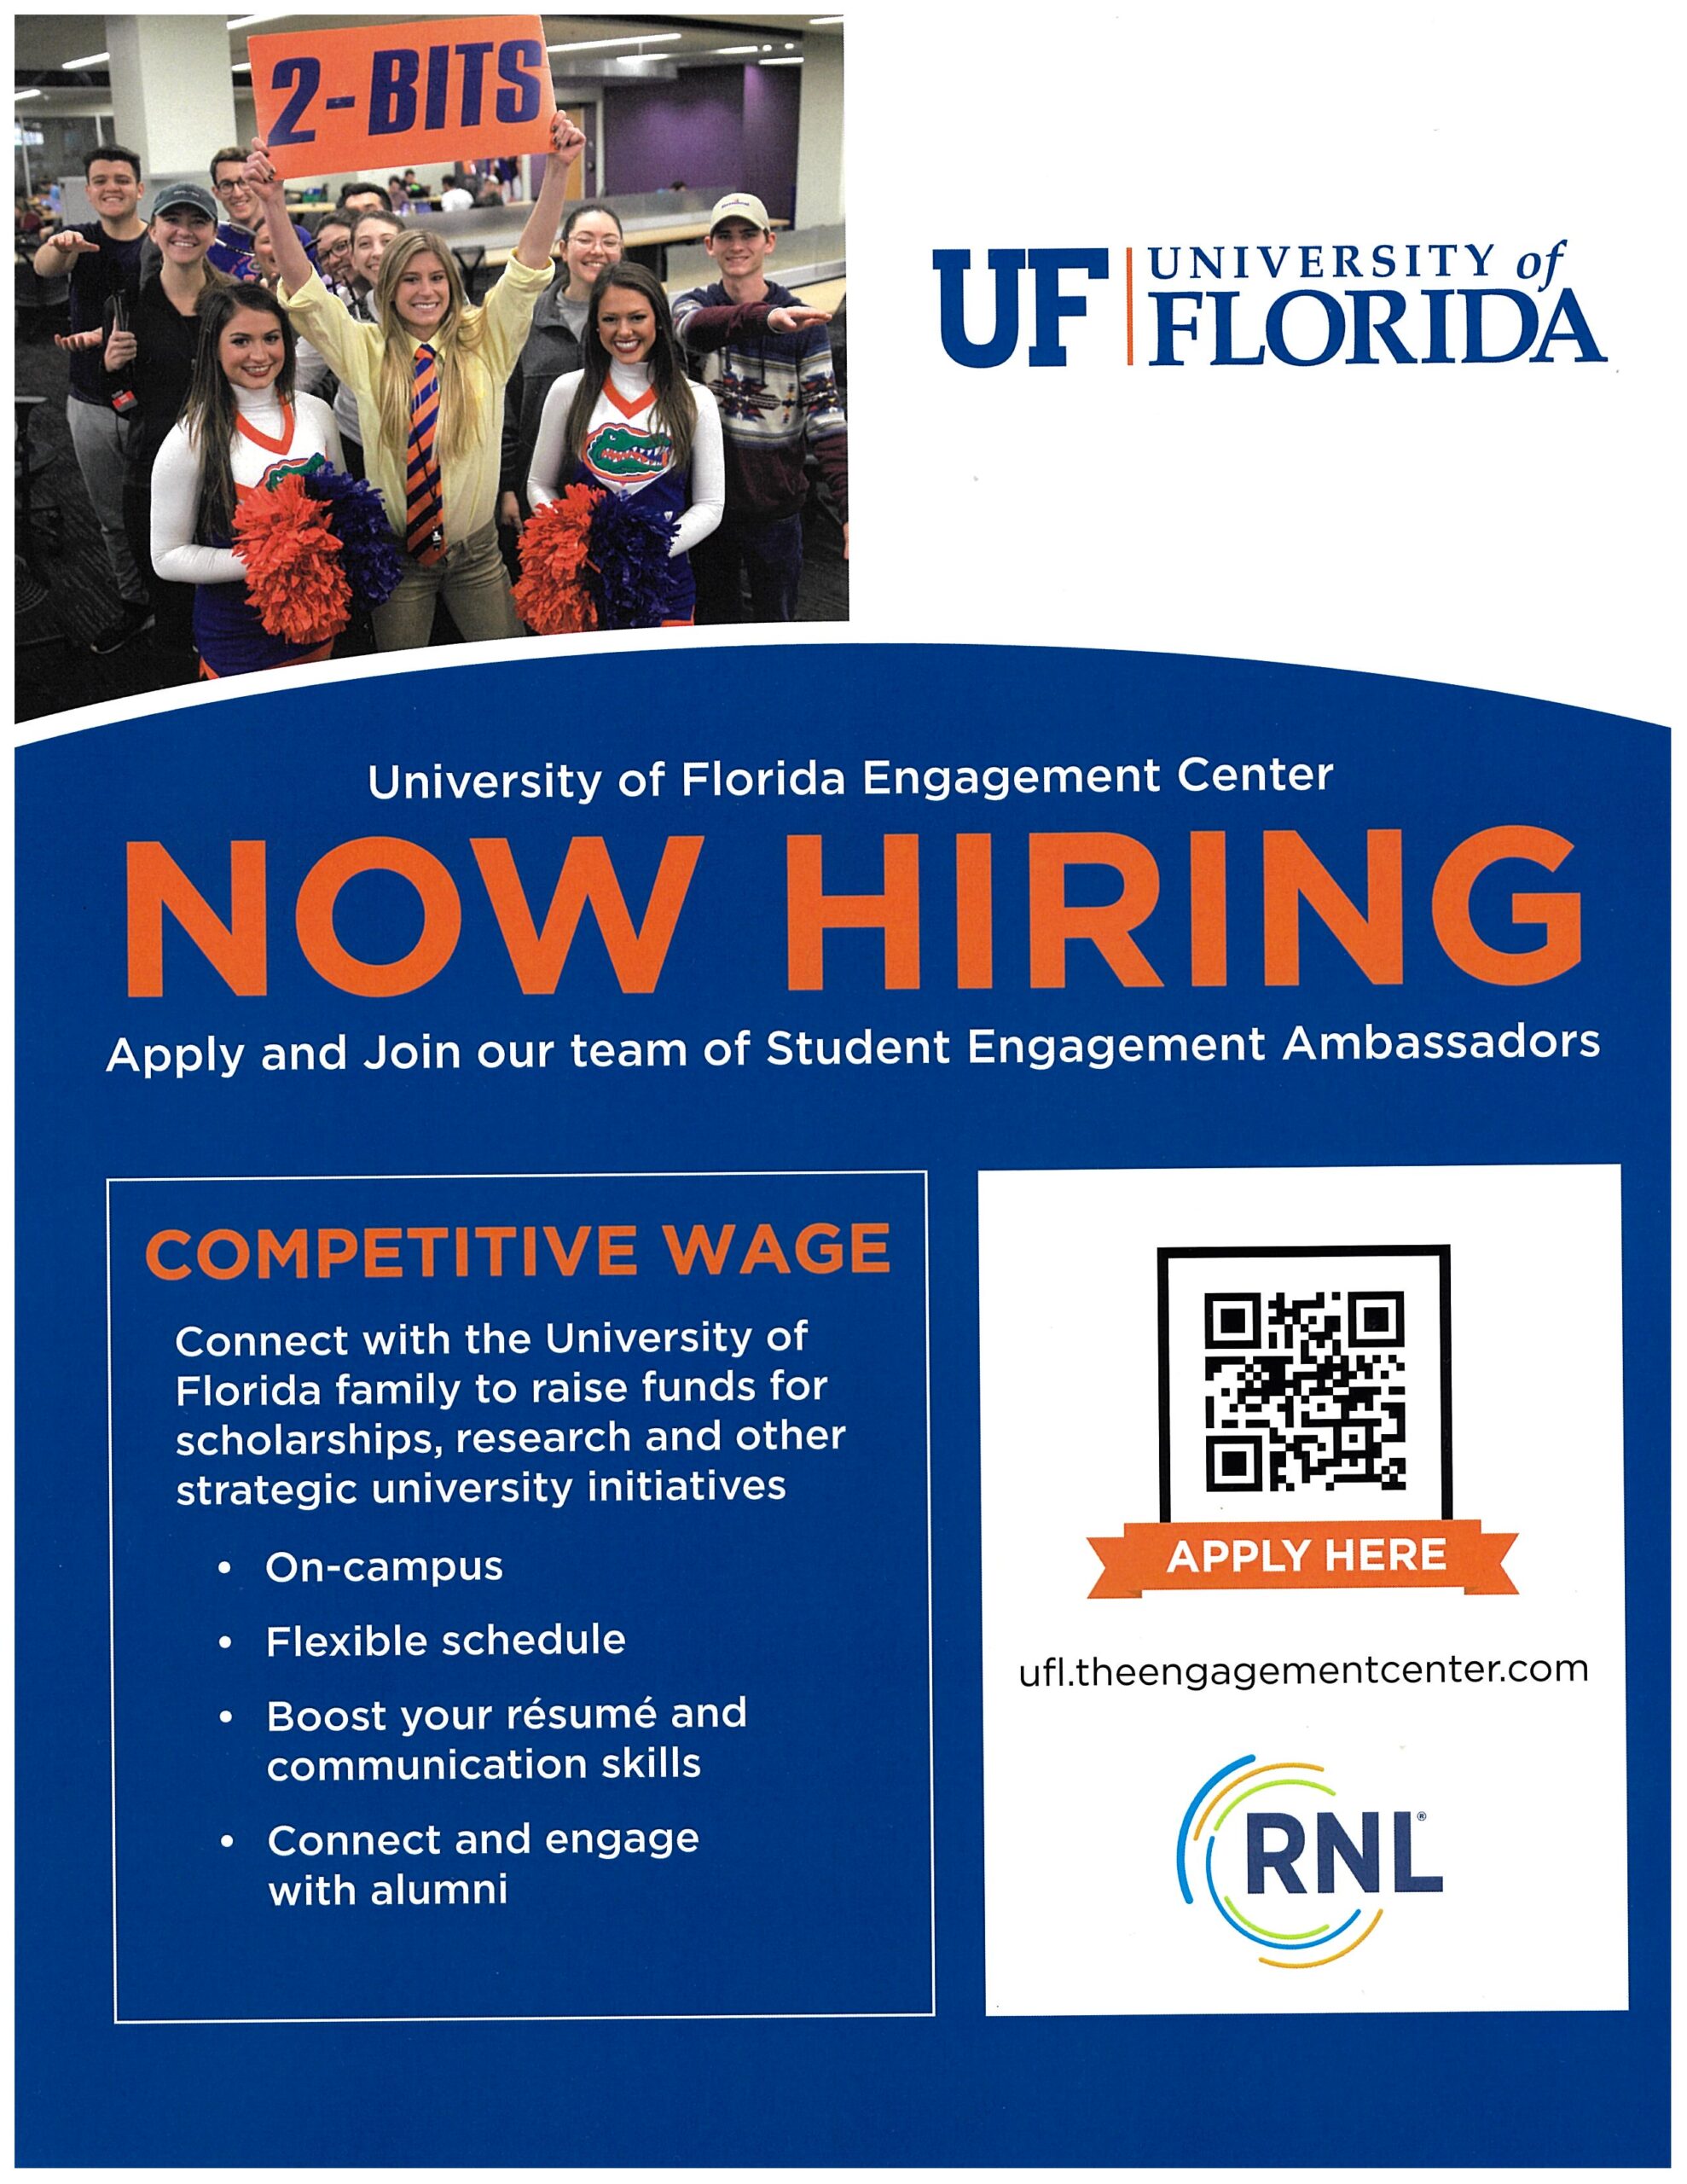 A flyer for available positions at the Student Engagement Ambassadors team at UF Engagement Center.